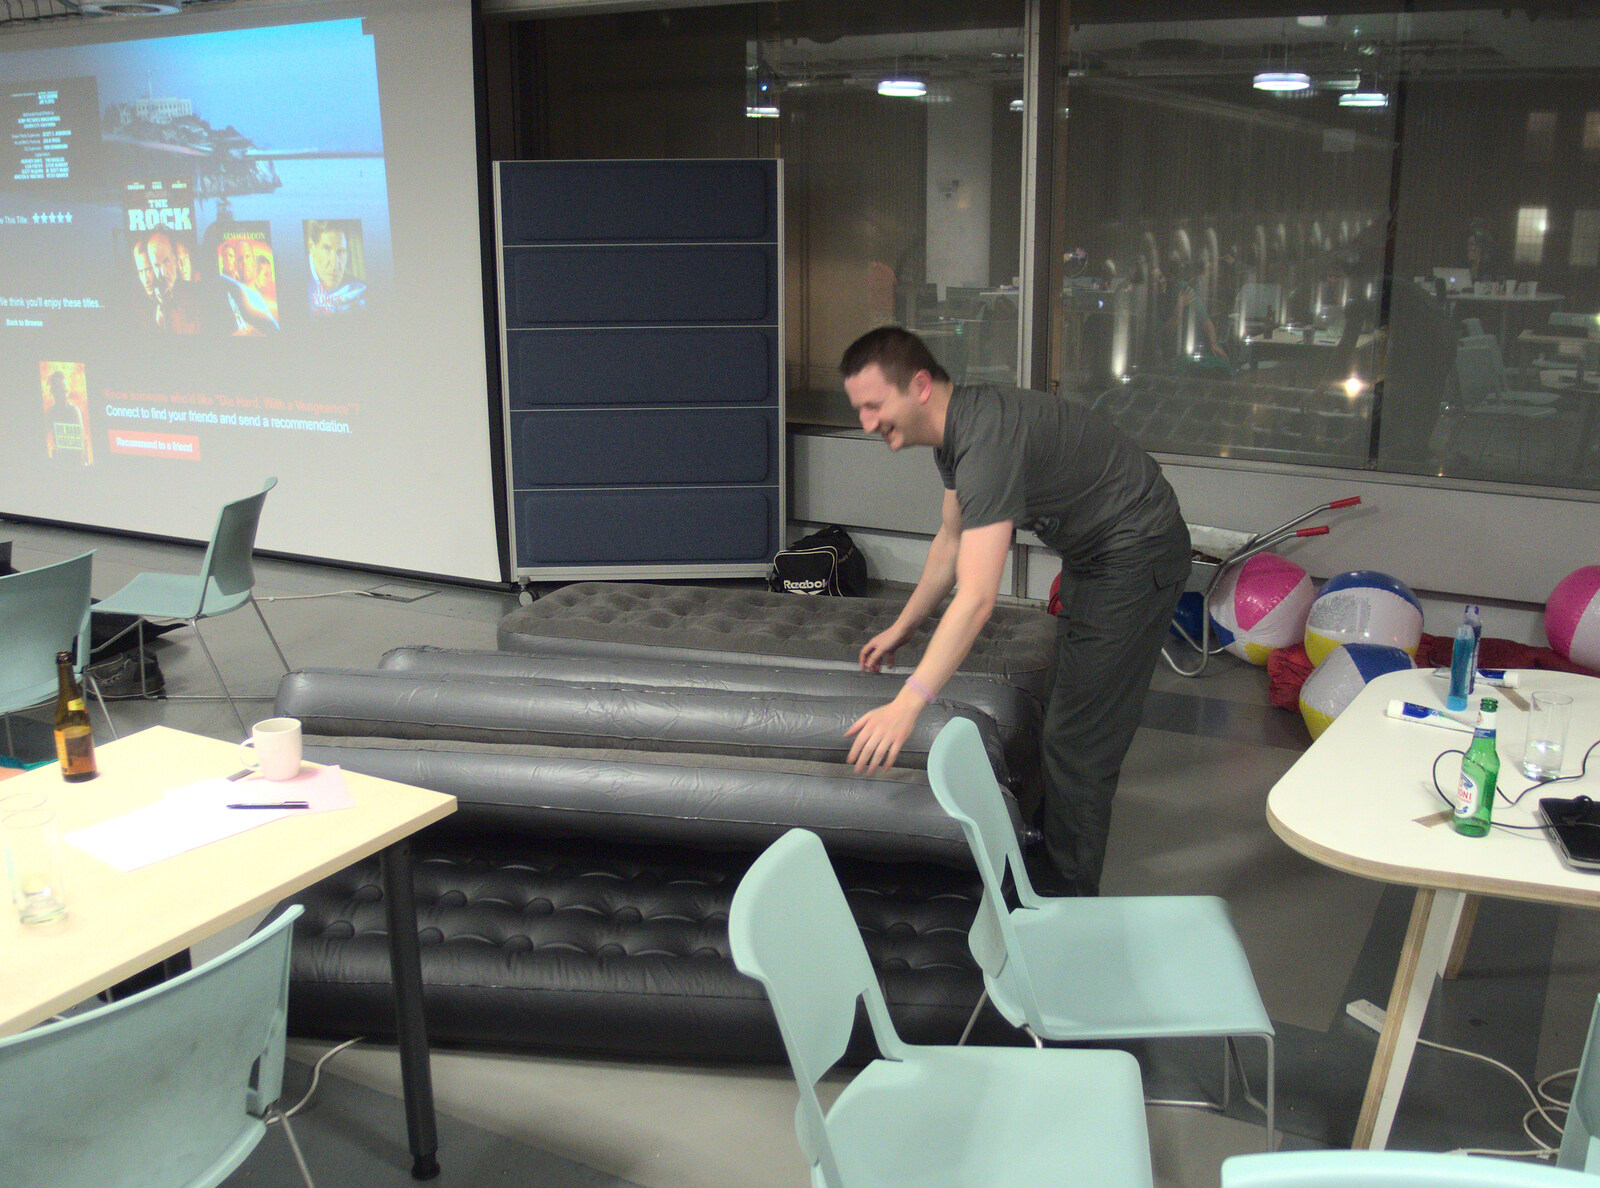 Joe moves some airbeds around from SwiftKey Innovation Nights, Westminster, London - 19th December 2014